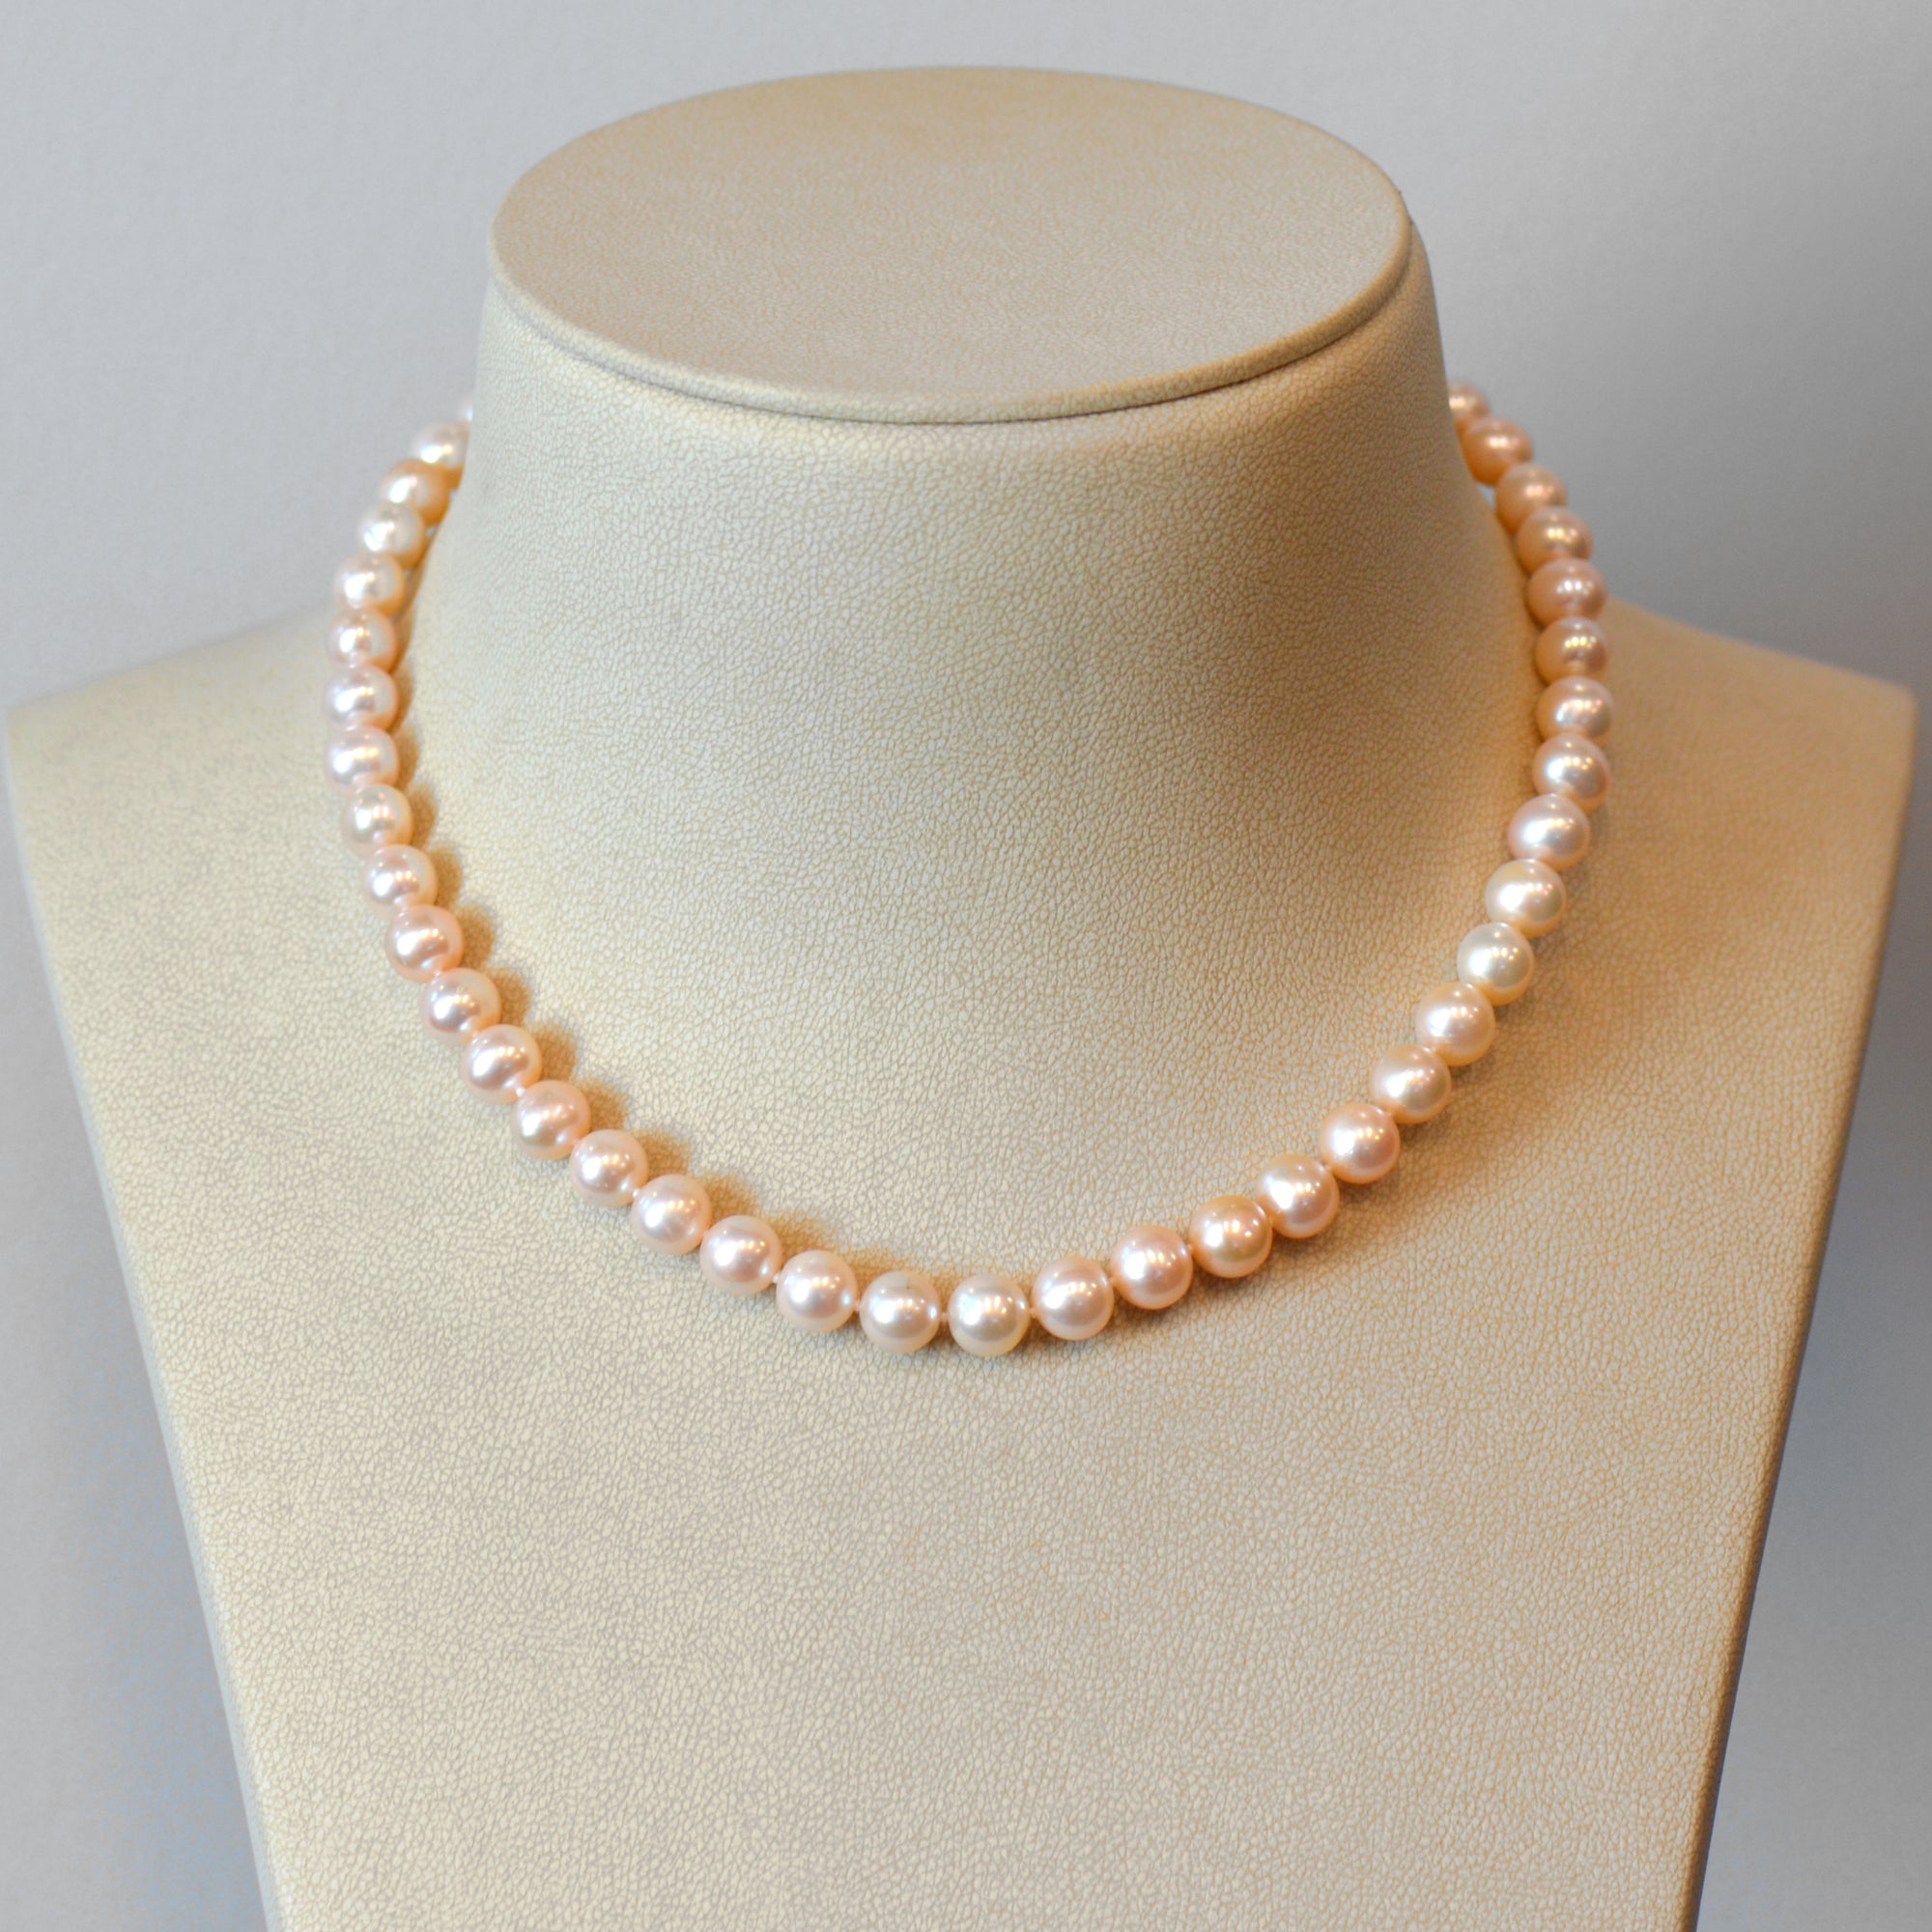 White Rosé Akoya Pearl Strand Necklace With 14K Yellow Gold Diamond Clasp